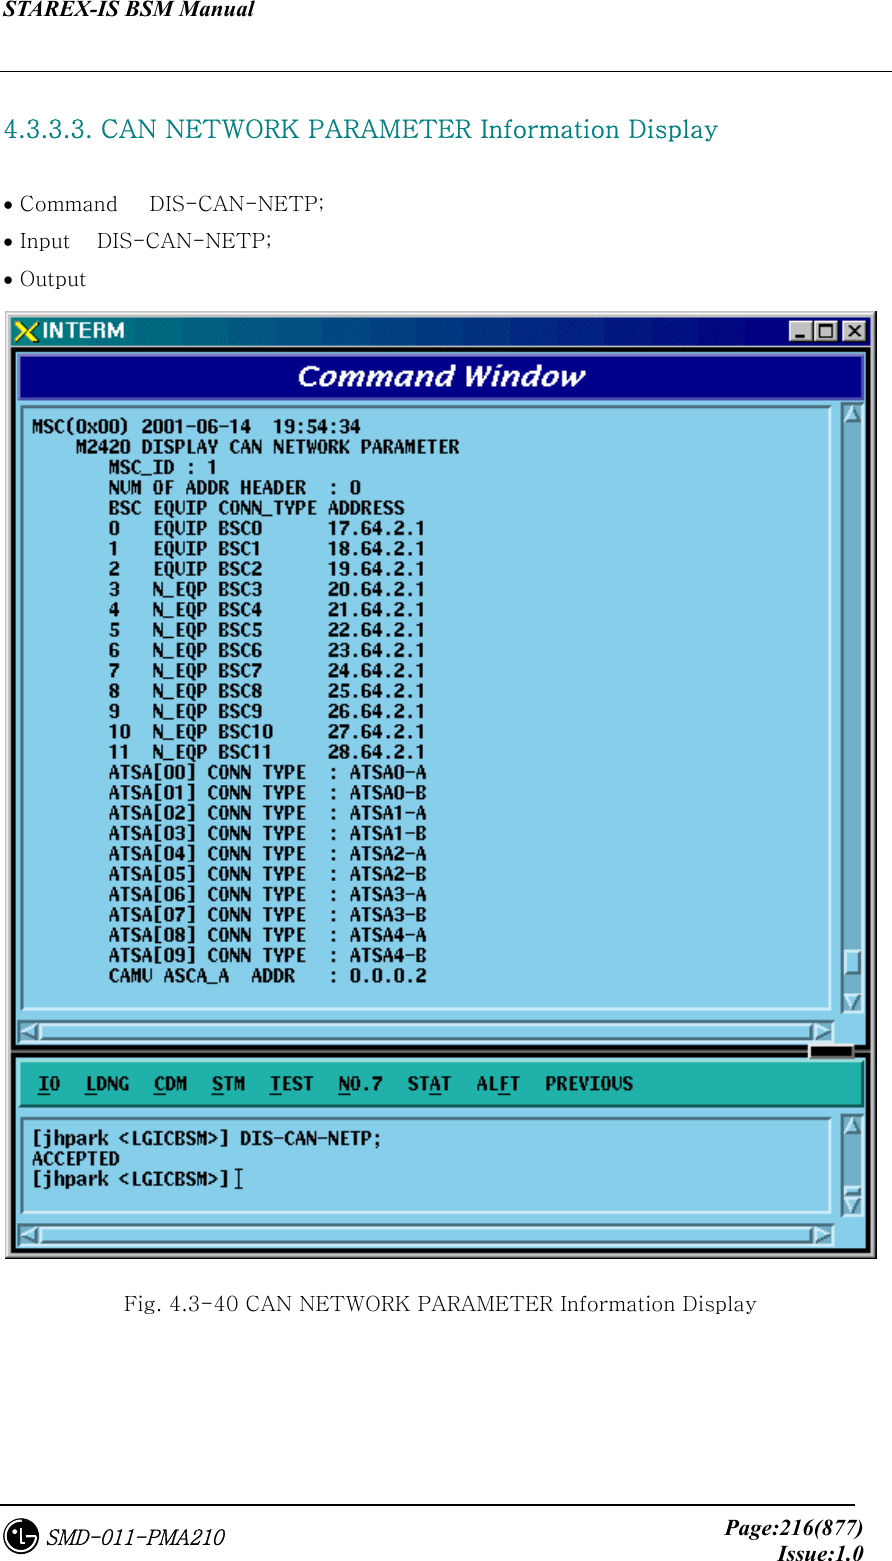 STAREX-IS BSM Manual     Page:216(877)Issue:1.0SMD-011-PMA210  4.3.3.3. CAN NETWORK PARAMETER Information Display    • Command   DIS-CAN-NETP; • Input    DIS-CAN-NETP; • Output    Fig. 4.3-40 CAN NETWORK PARAMETER Information Display 